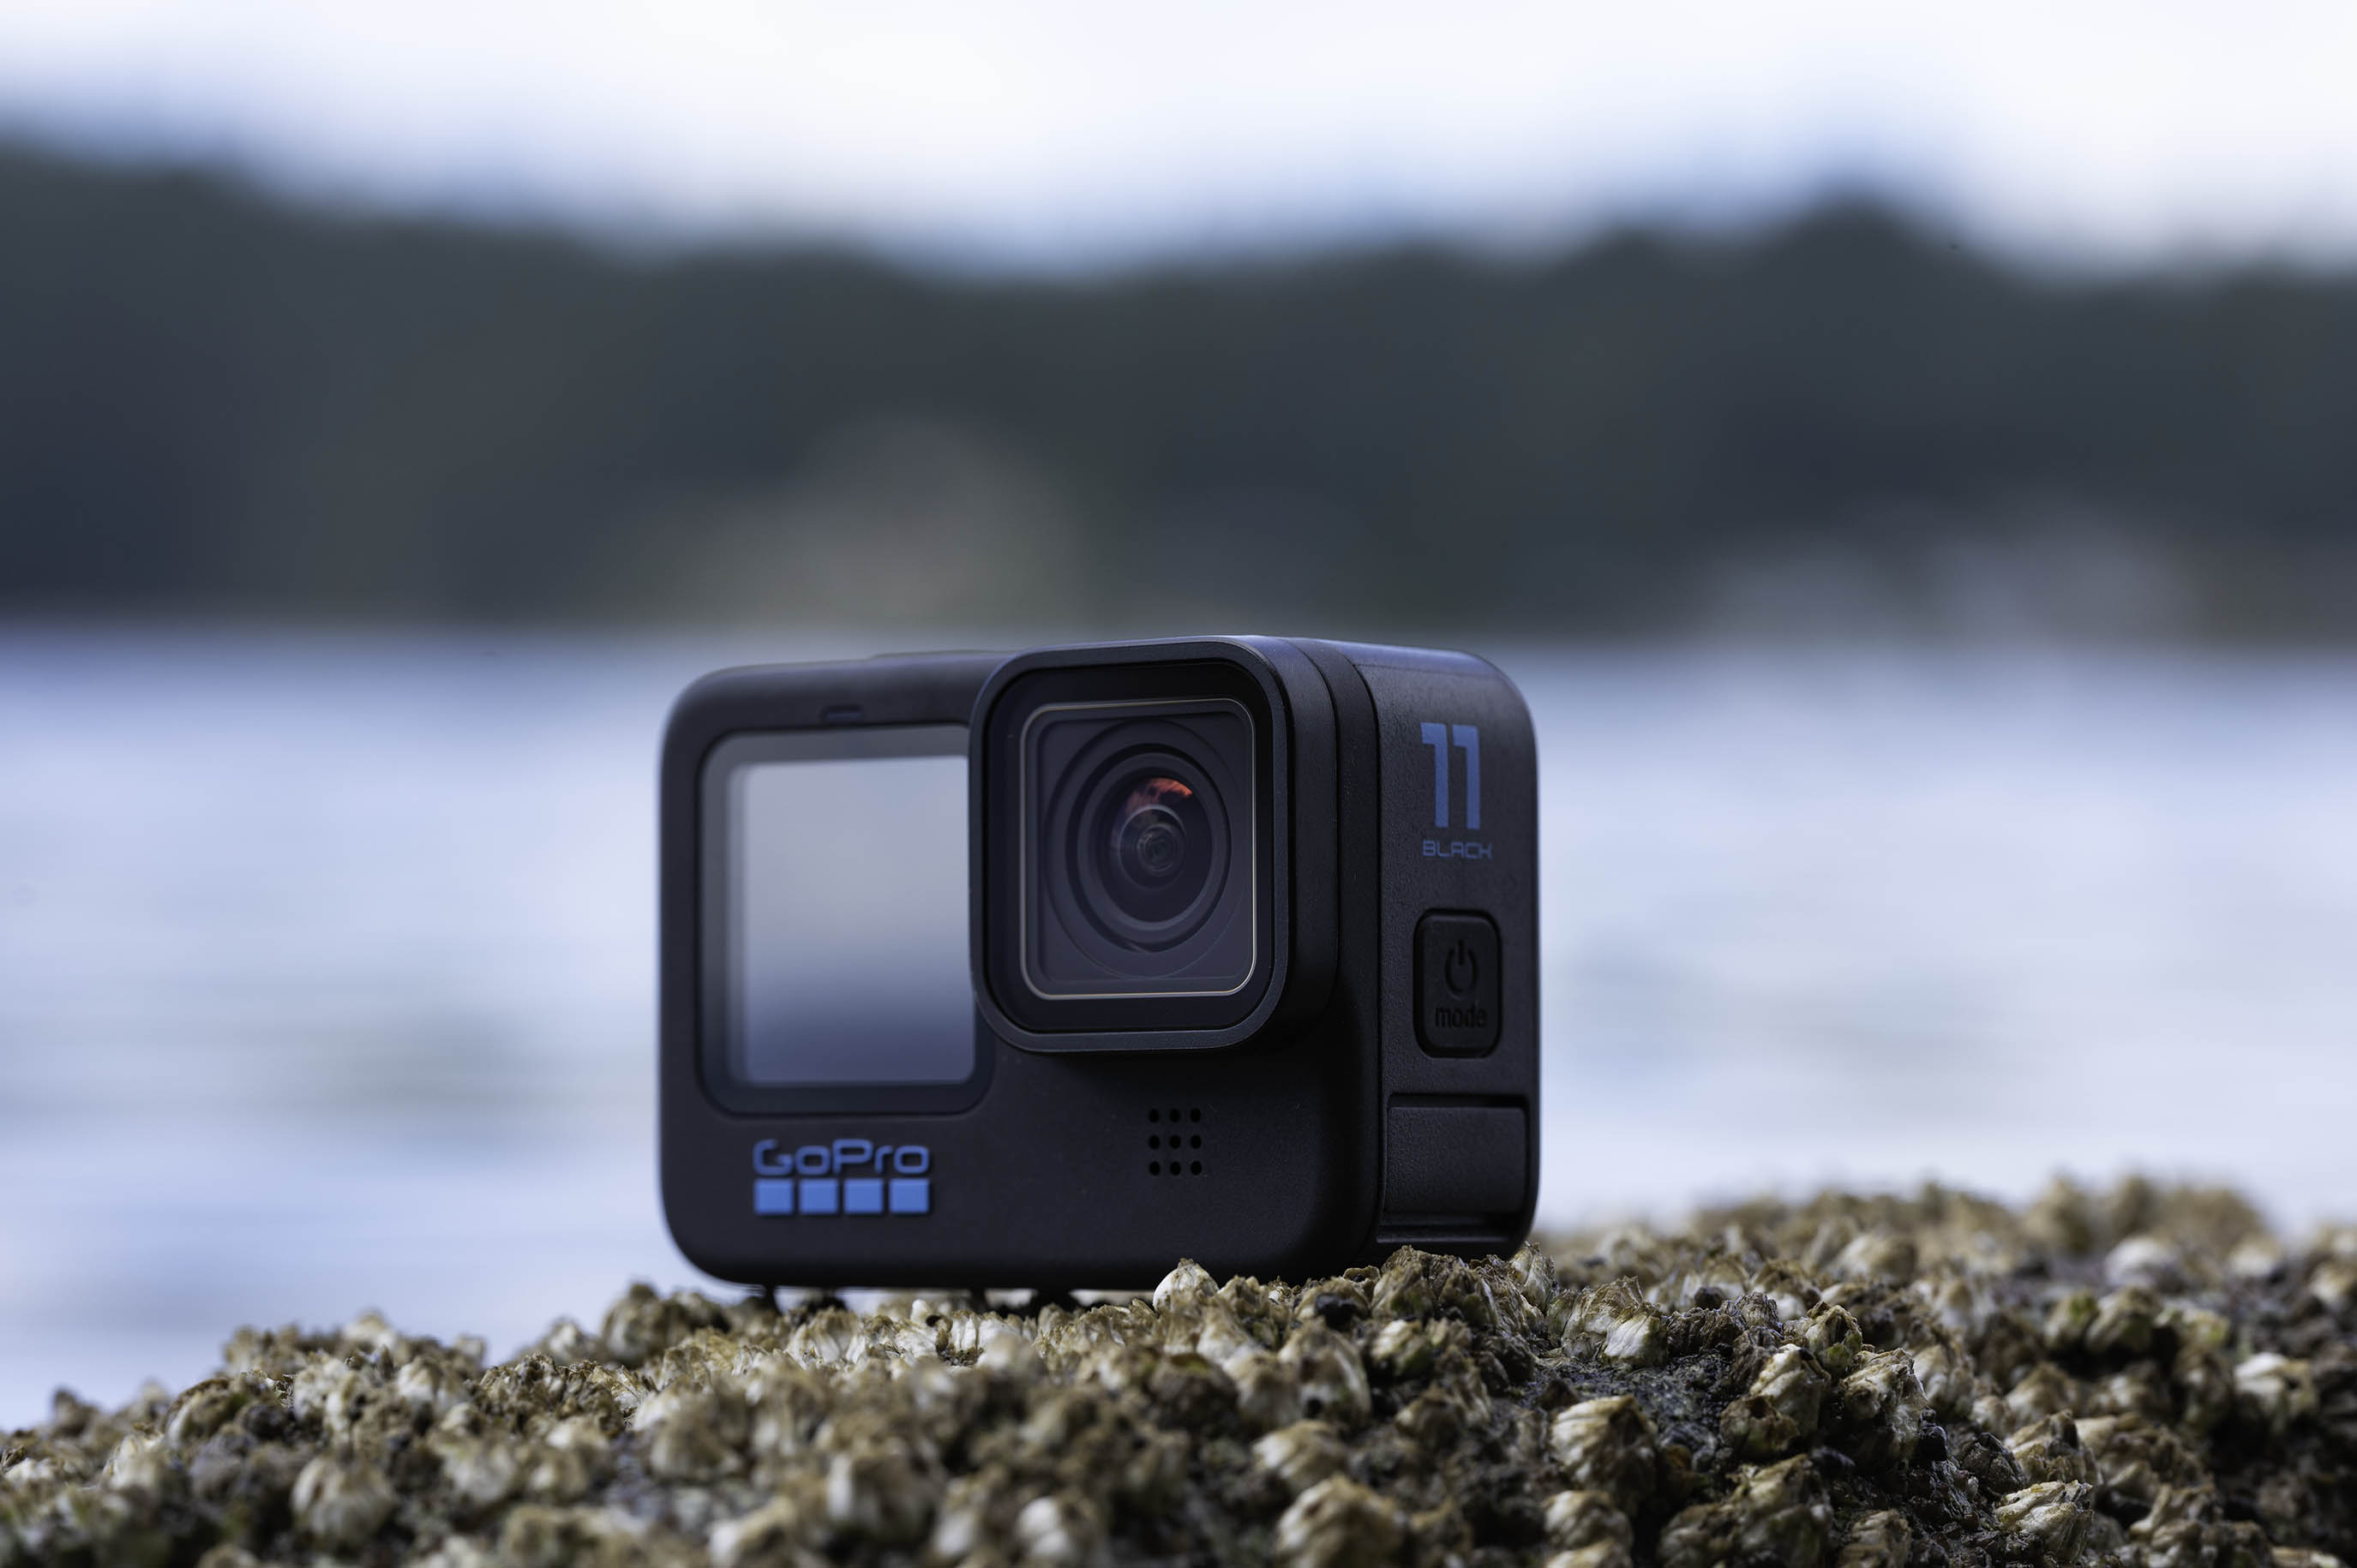 The GoPro Hero 11 Black on a rock with barnacles.